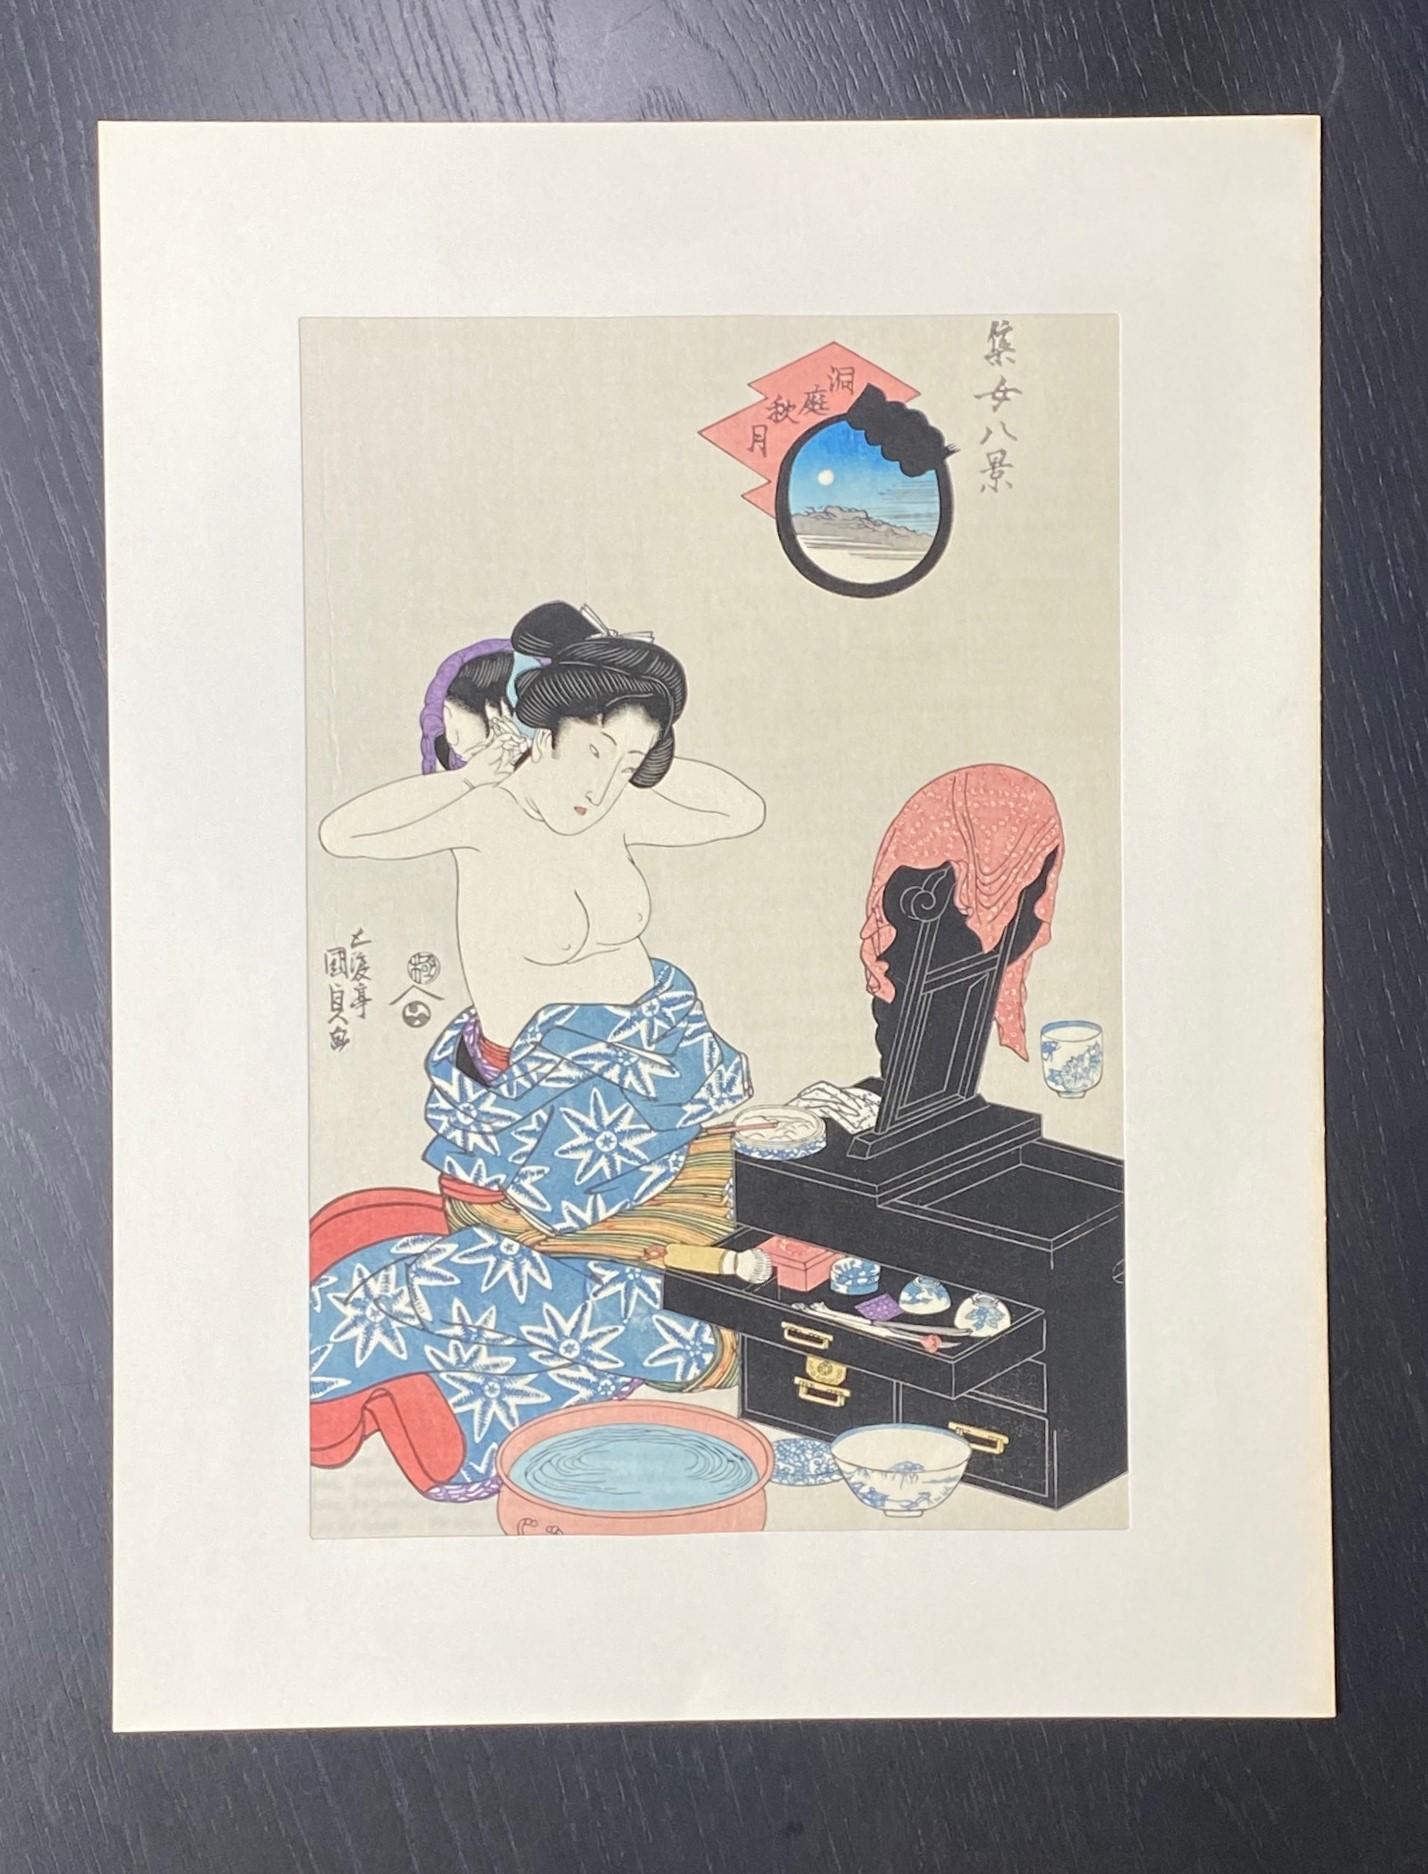 A beautifully composed and richly colored Japanese woodblock print featuring a semi-undressed nude woman, likely a Geisha, fixing her hair while sitting before her vanity.  A somewhat erotic and risqué image for its time.  

This is a later printing